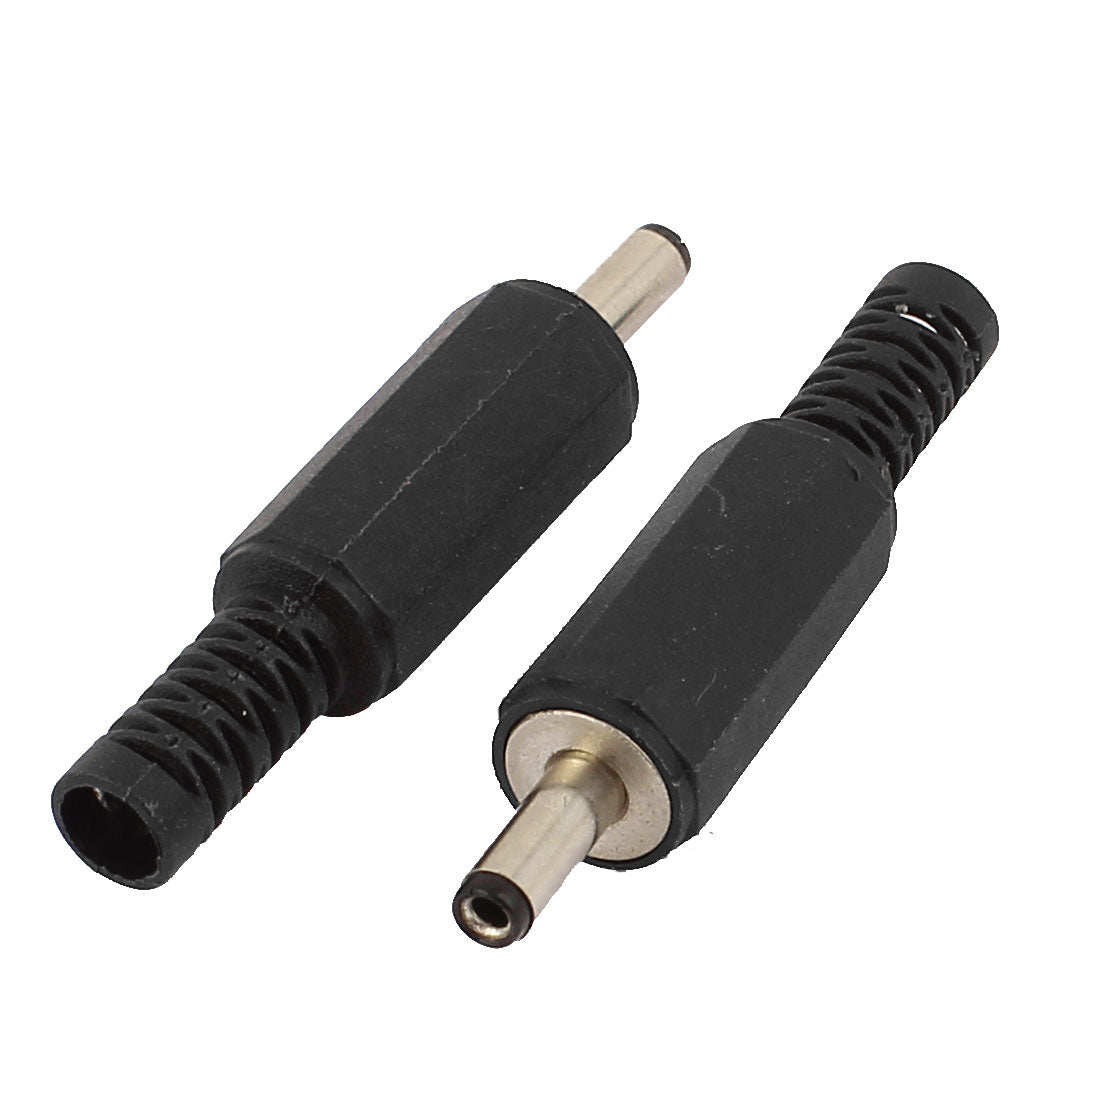 uxcell Uxcell 2 Pcs 3.5mm x 1.3mm DC Power Male Jack Connector for CCTV Camera